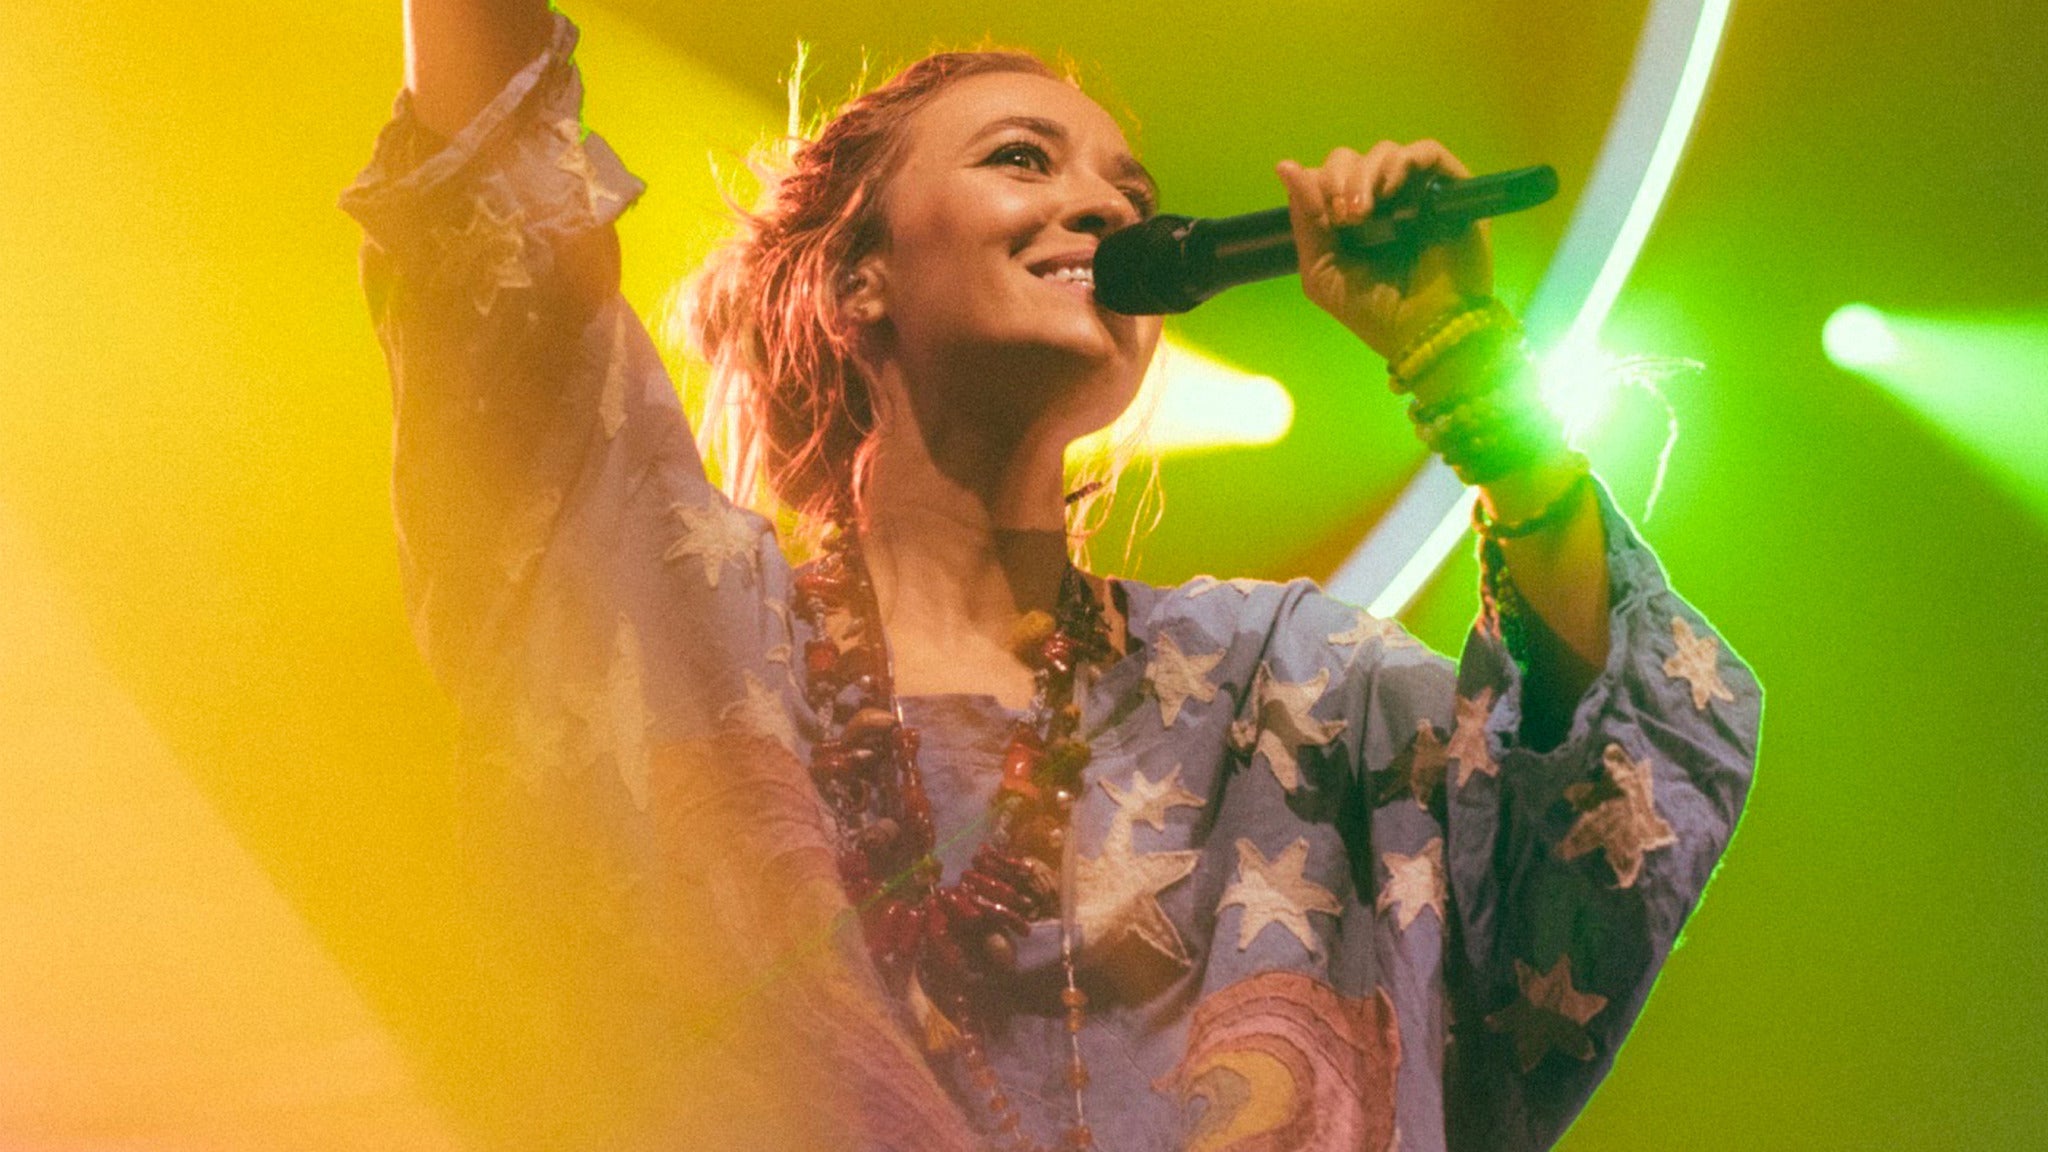 Lauren Daigle: Behold Tour 2022 presale code for advance tickets in New Orleans